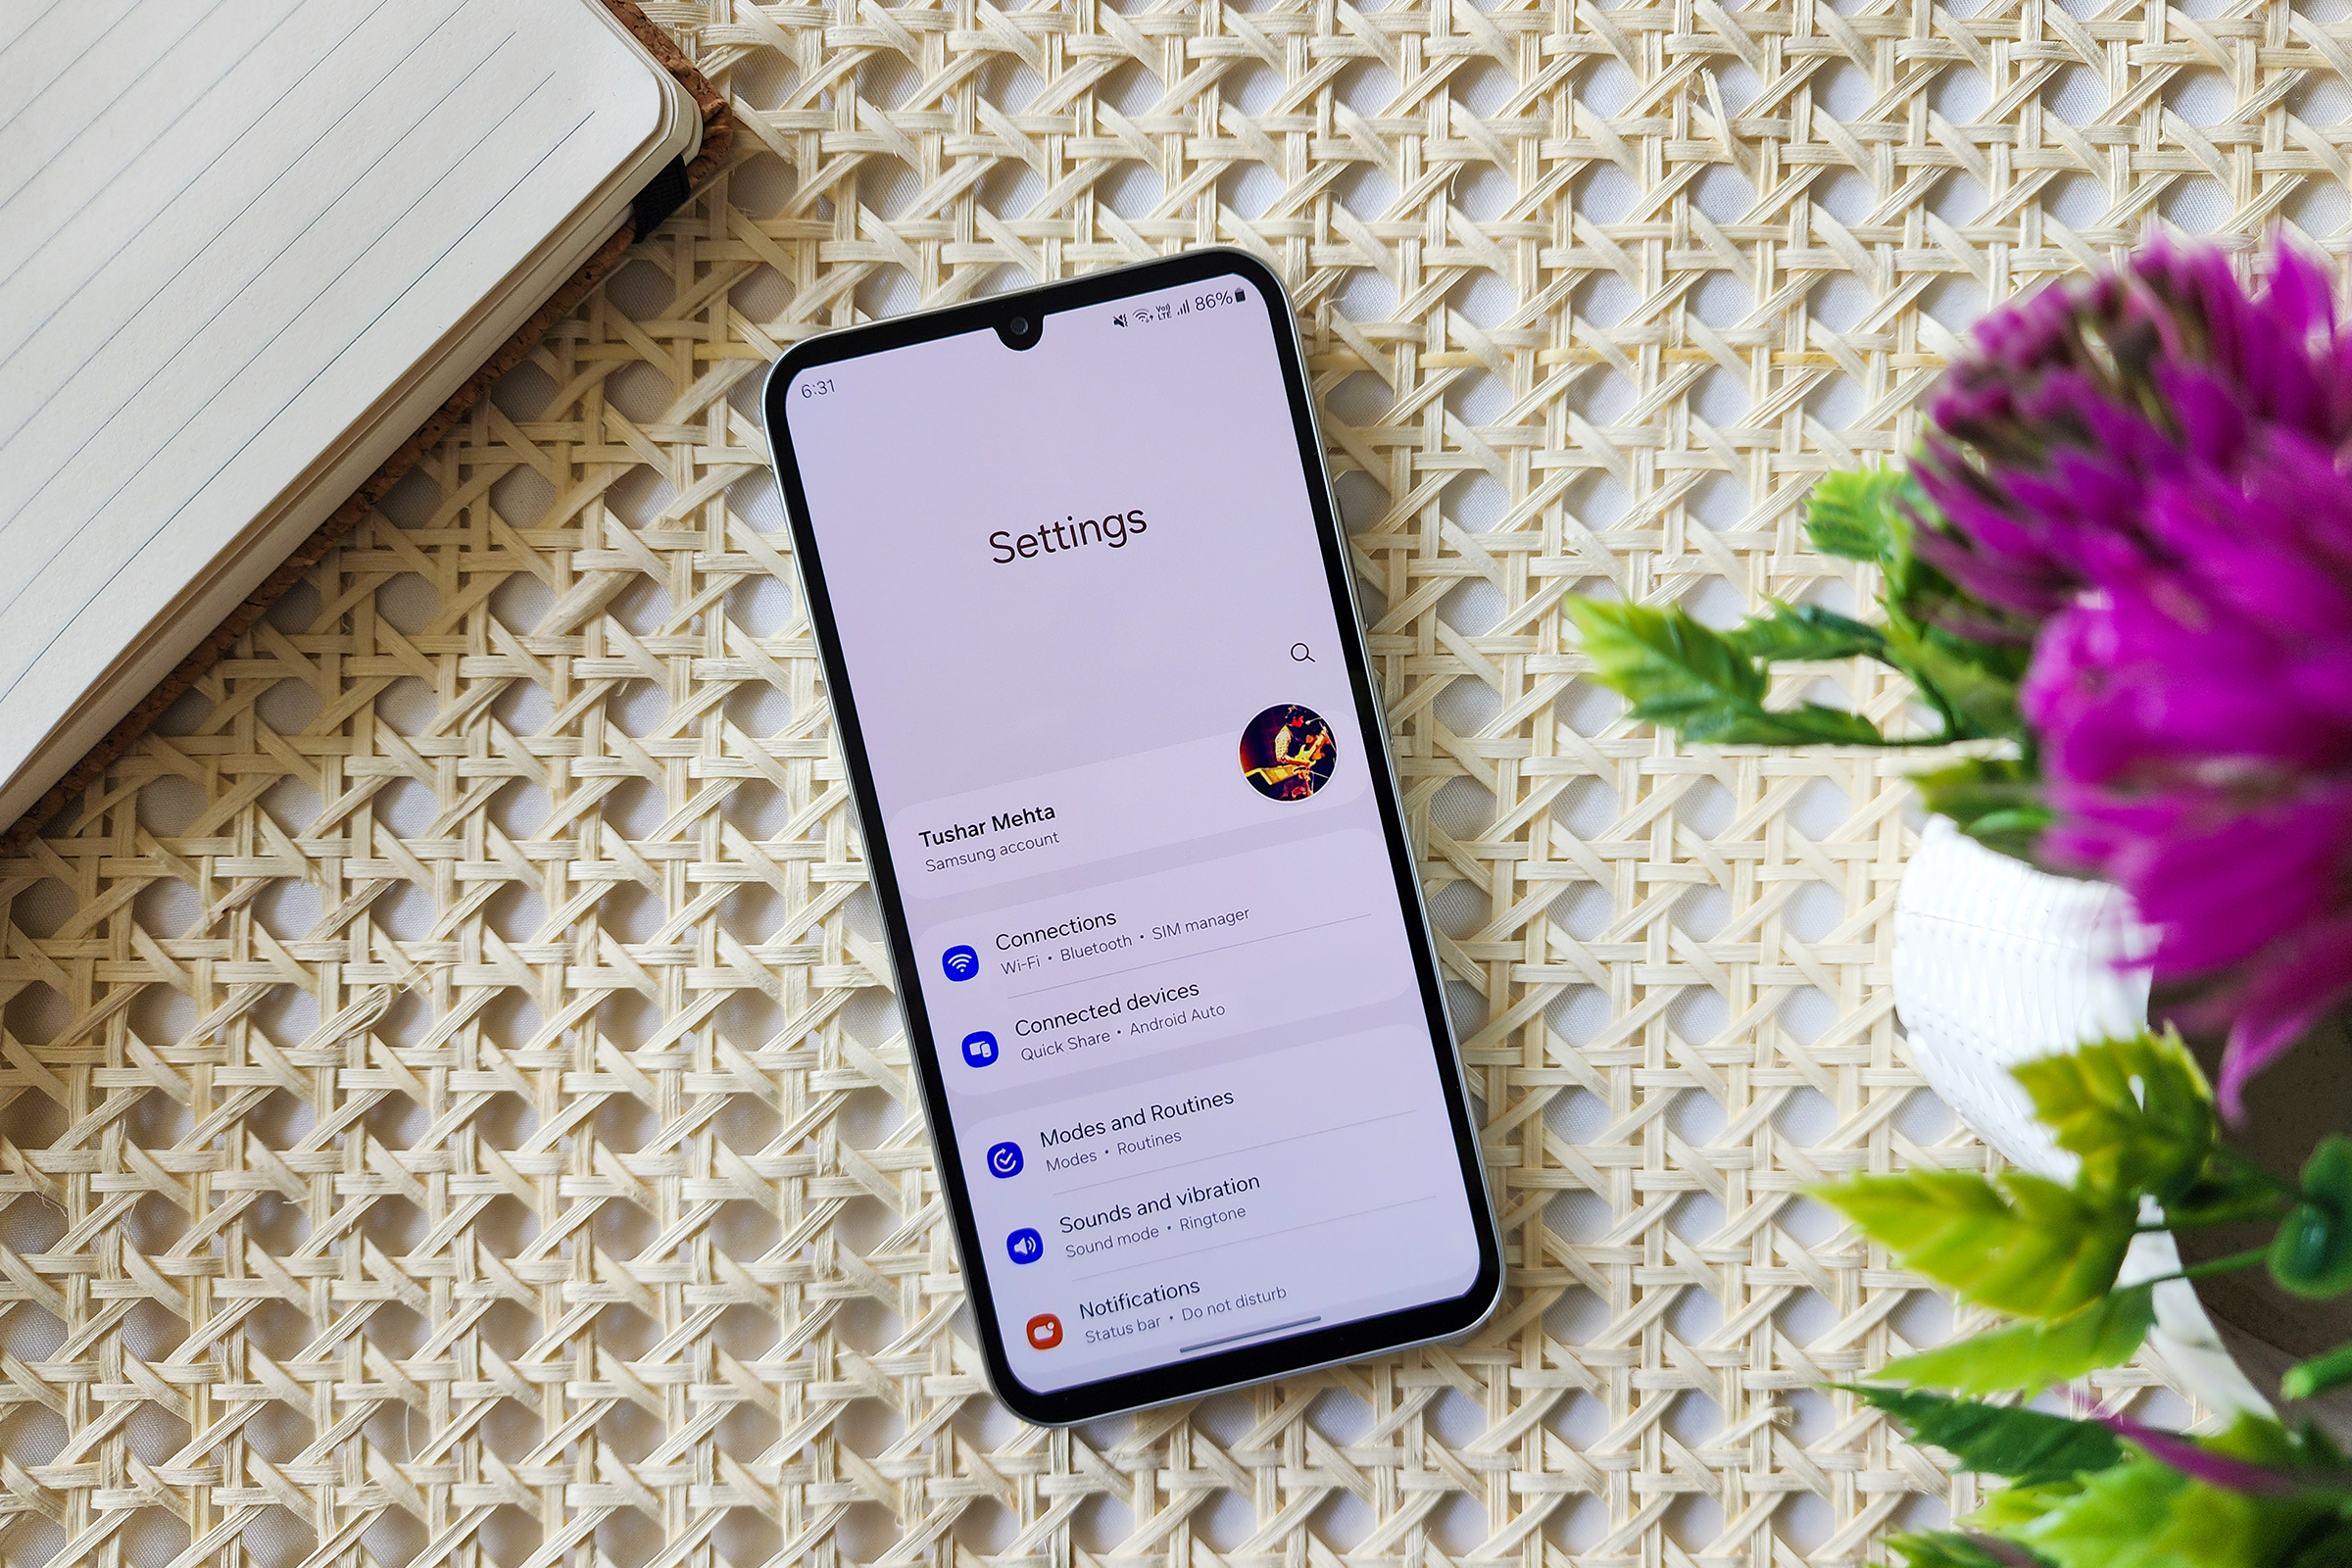 One UI 6 update: Here's everything new for Samsung Galaxy smartphones